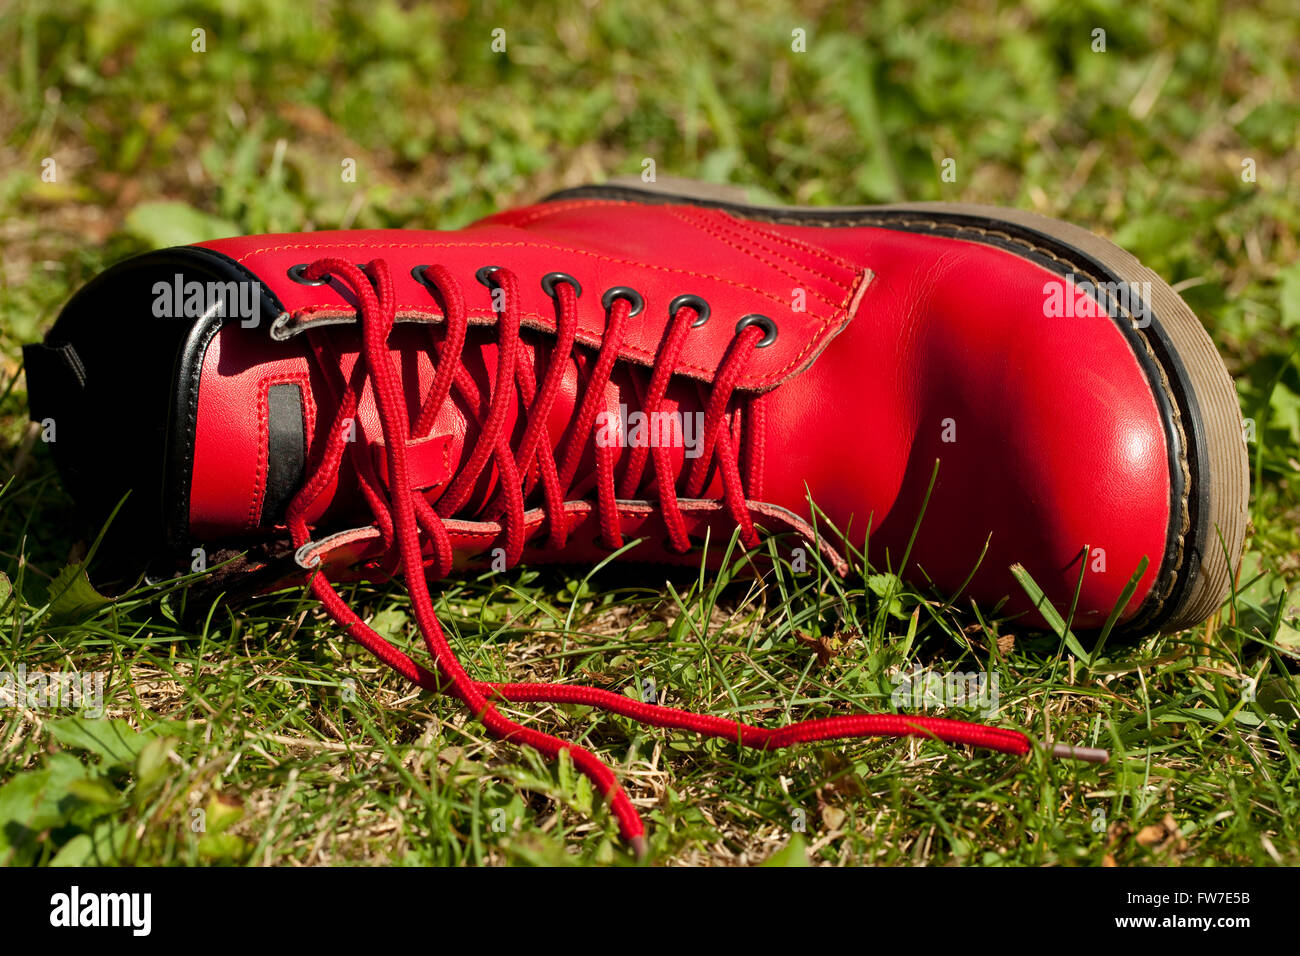 red leather shoe lies on grass Stock Photo